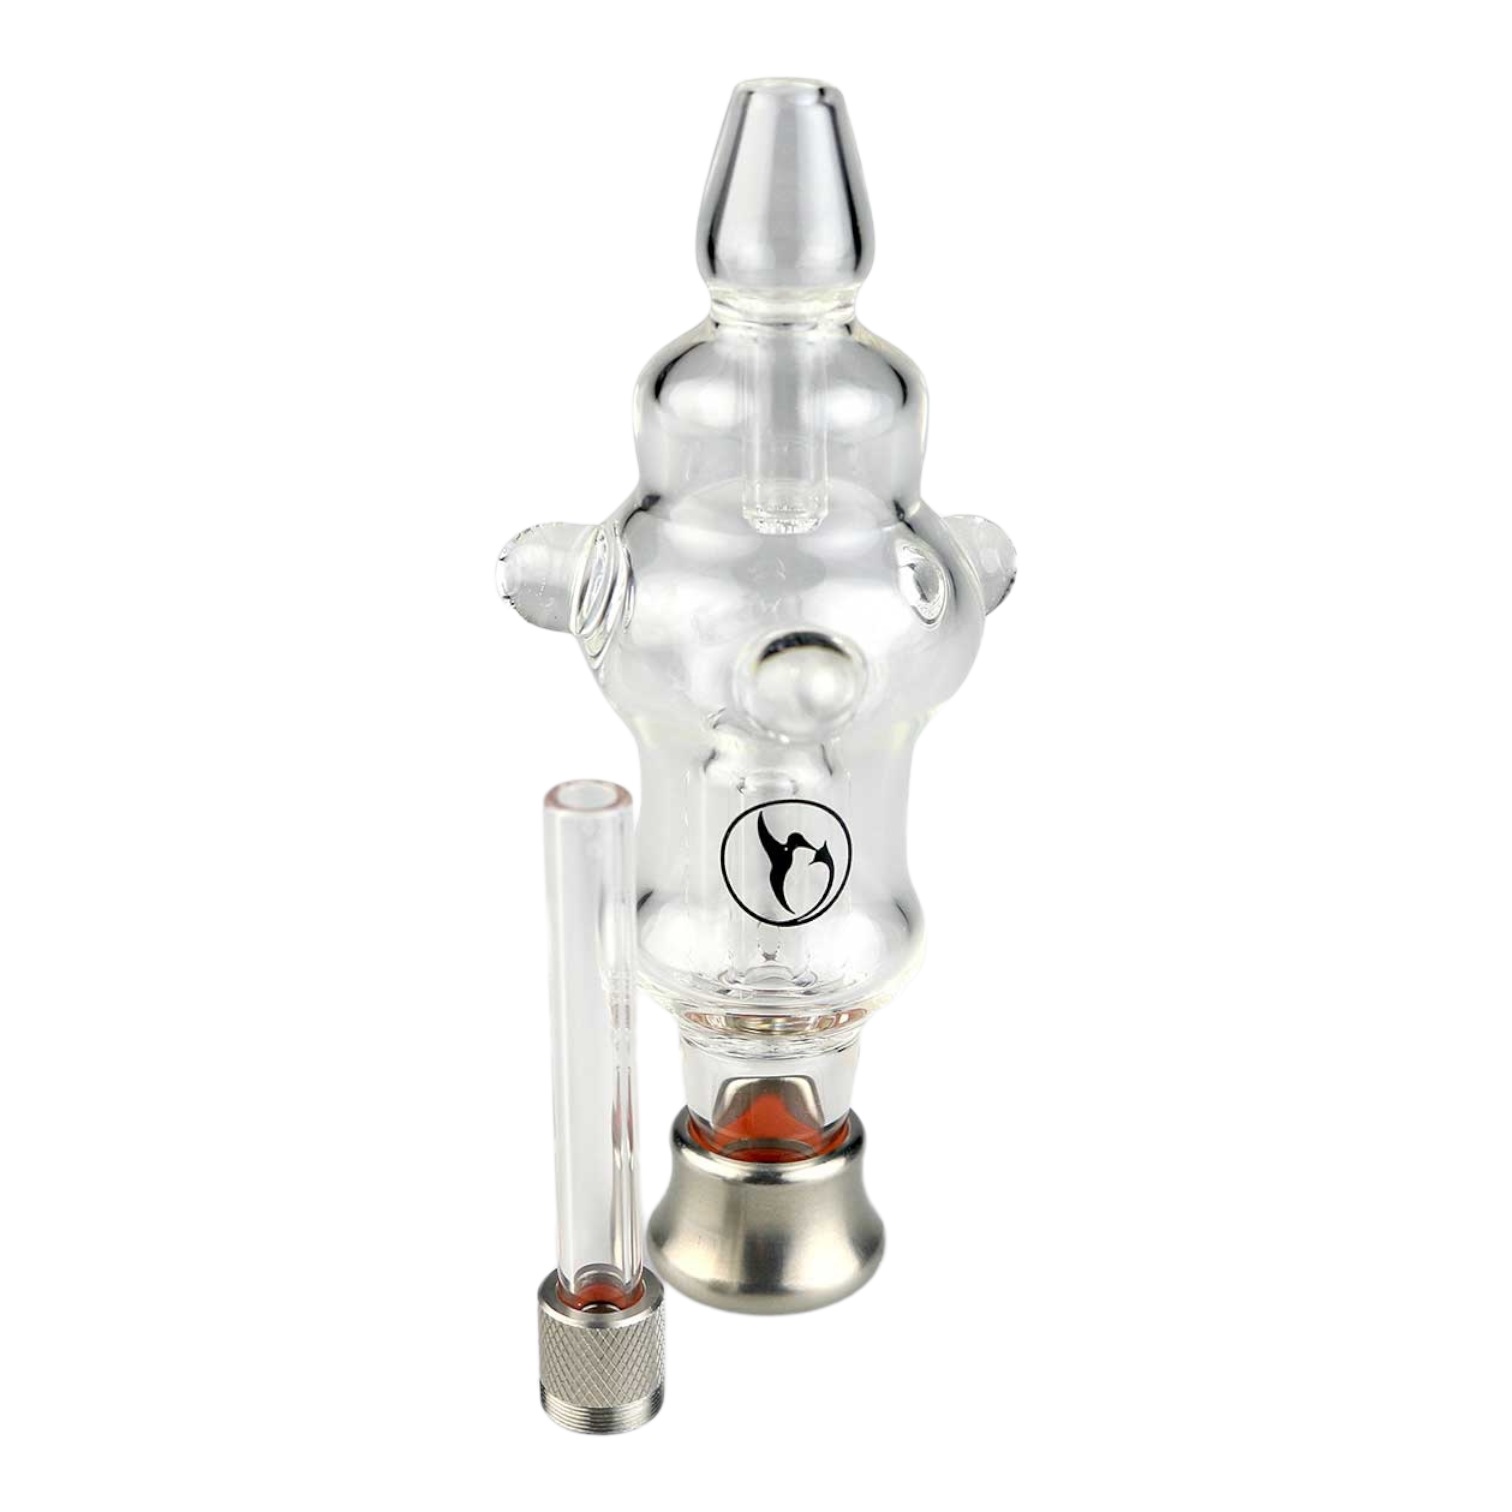 Buy 4 Inch Silicone Nectar Collector with Quartz Tip Online